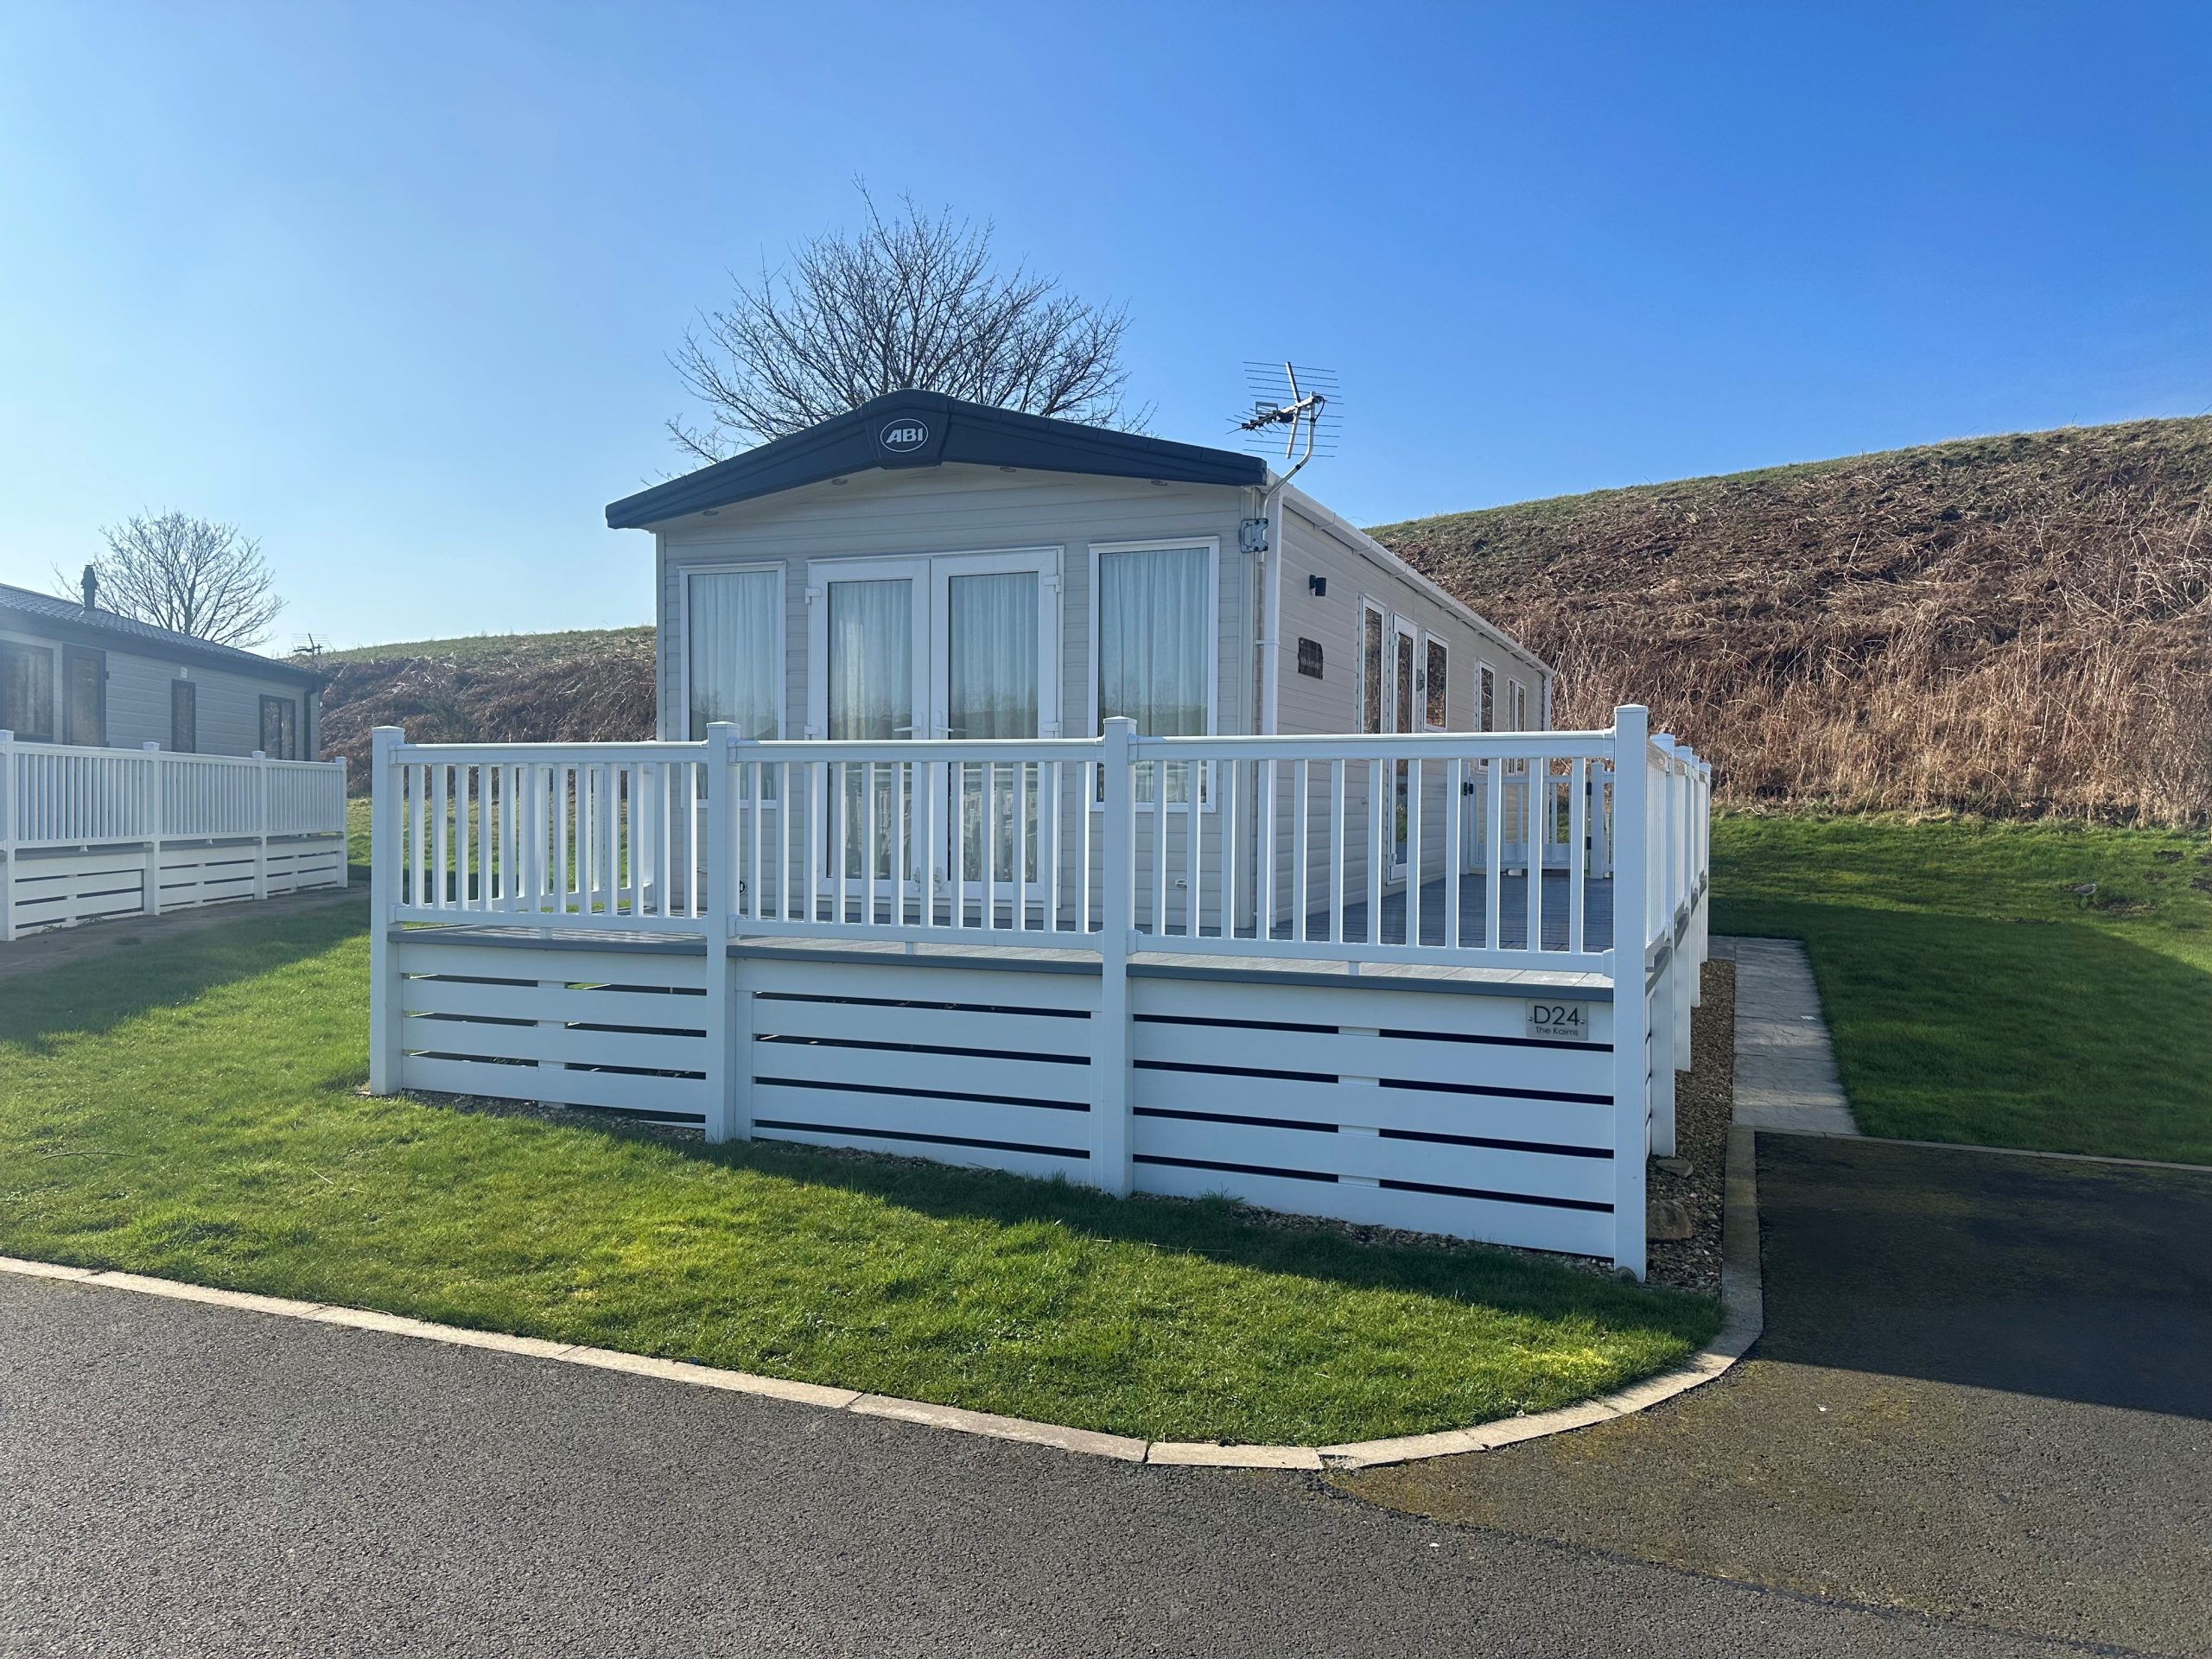 Understanding Caravan Holiday Homes: Investments, Restrictions & Considerations